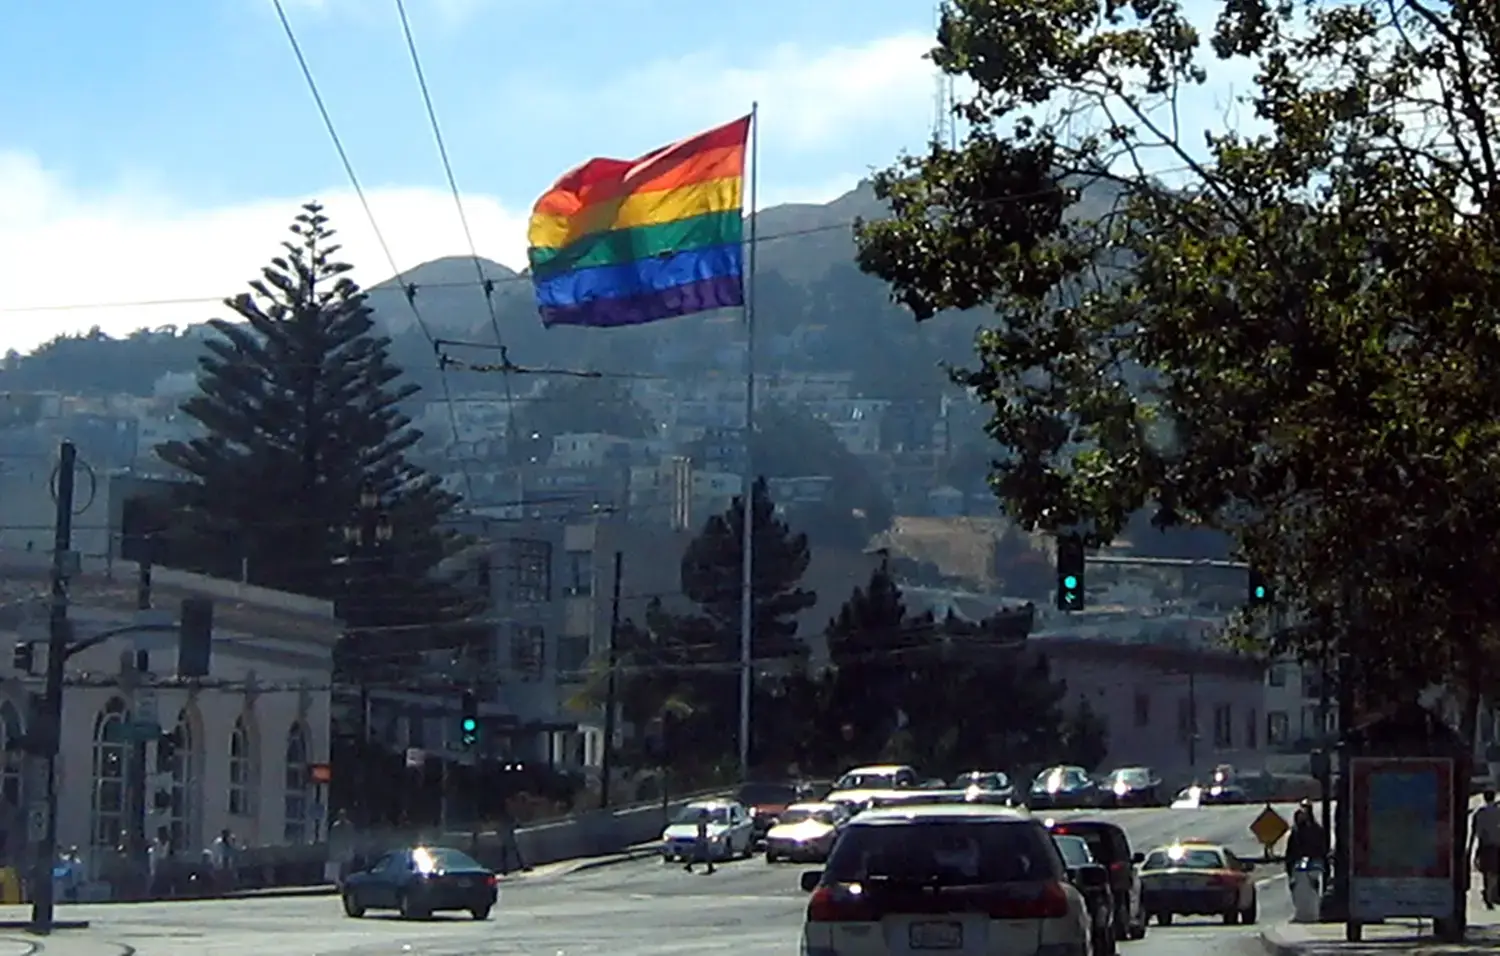 A queer flag rises above the Castro neighborhood.